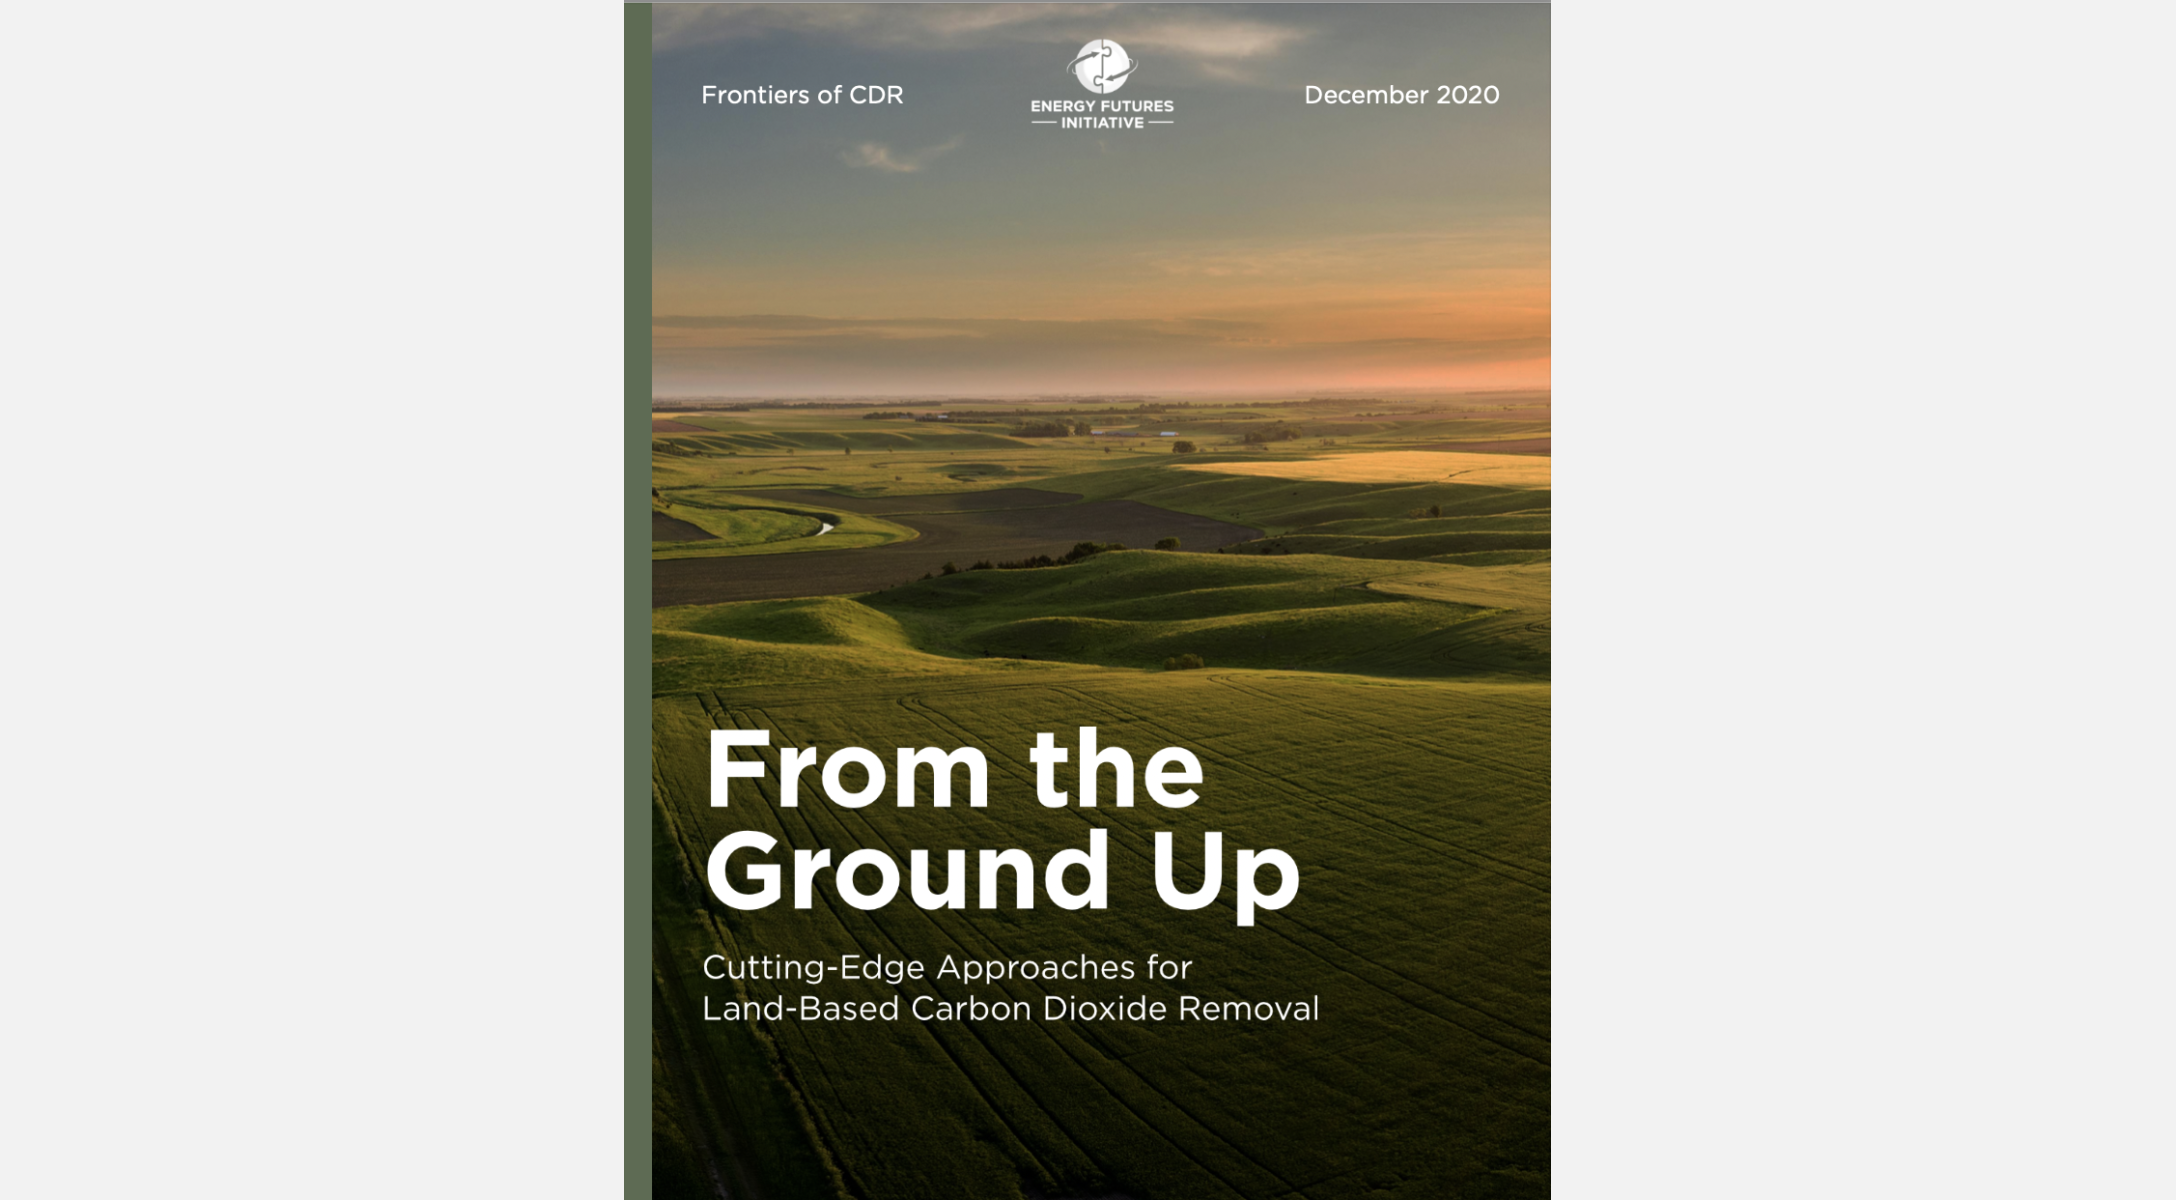 Cover image of From the Ground Up report